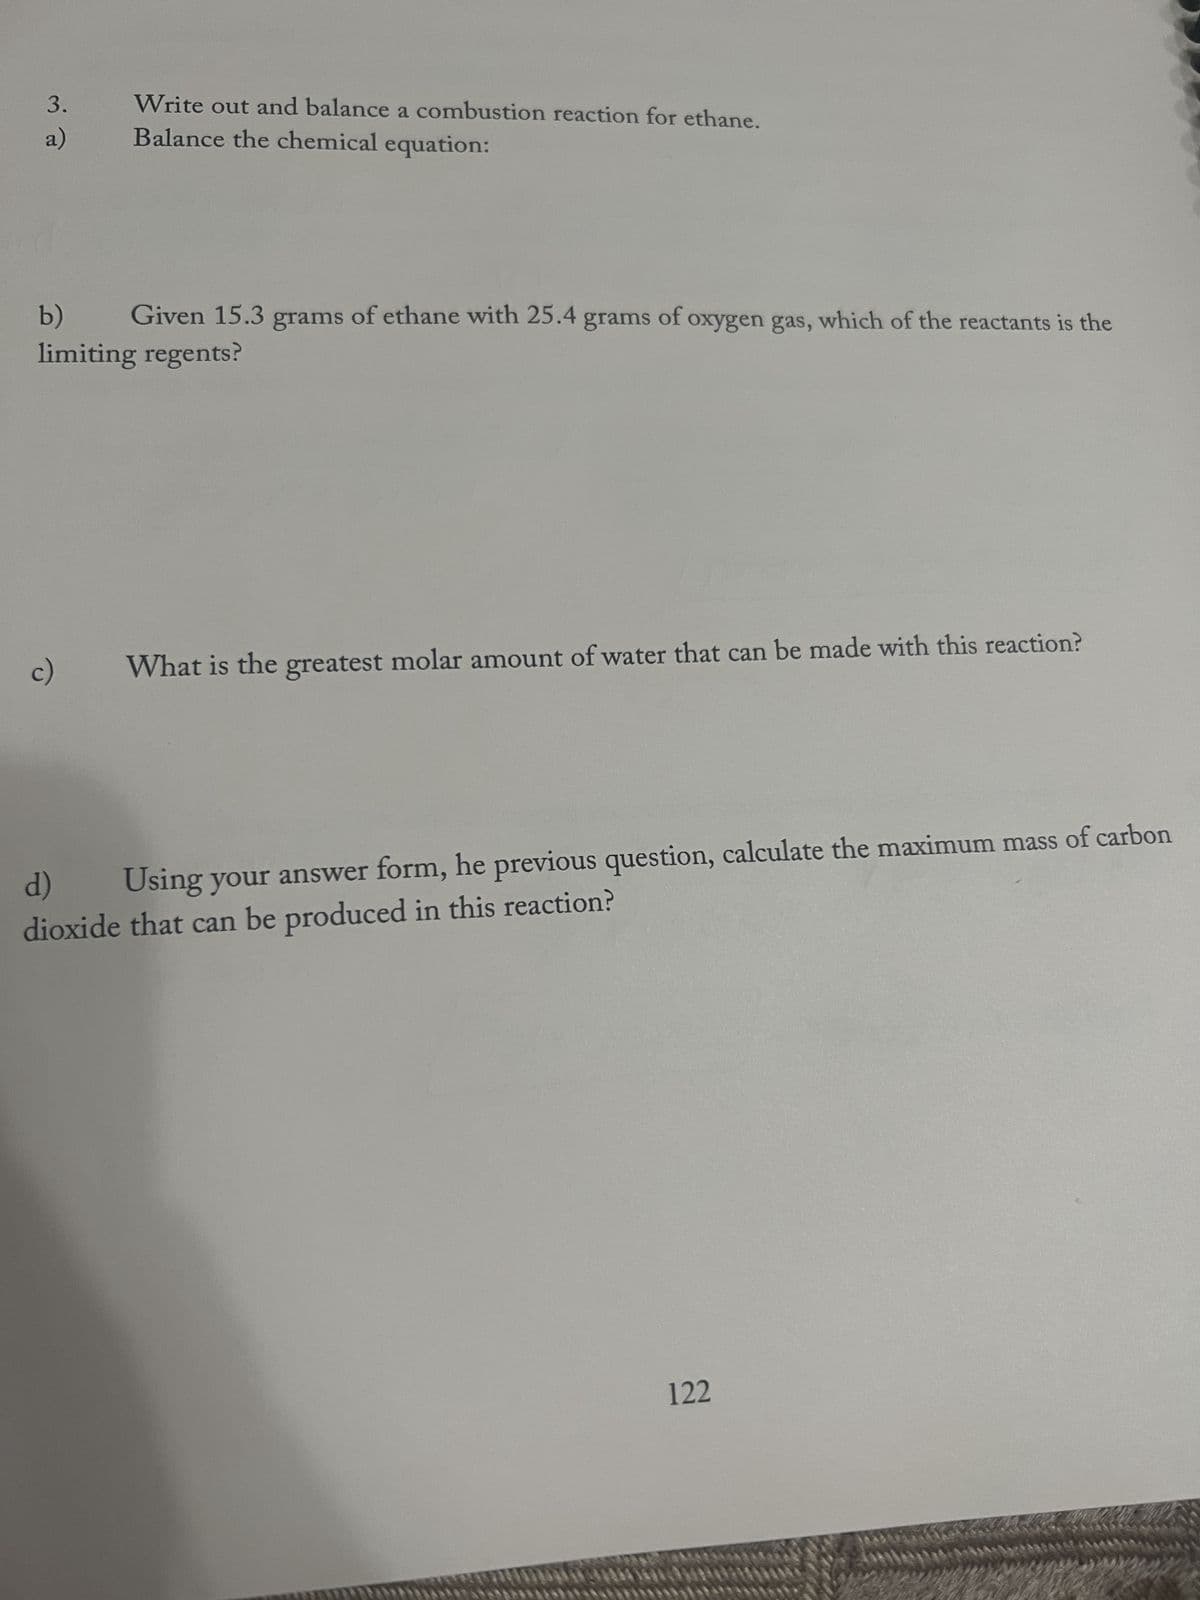 3.
a)
Write out and balance a combustion reaction for ethane.
Balance the chemical equation:
b) Given 15.3 grams of ethane with 25.4 grams of oxygen gas, which of the reactants is the
limiting regents?
c)
What is the greatest molar amount of water that can be made with this reaction?
Using your answer form, he previous question, calculate the maximum mass of carbon
d)
dioxide that can be produced in this reaction?
122
p